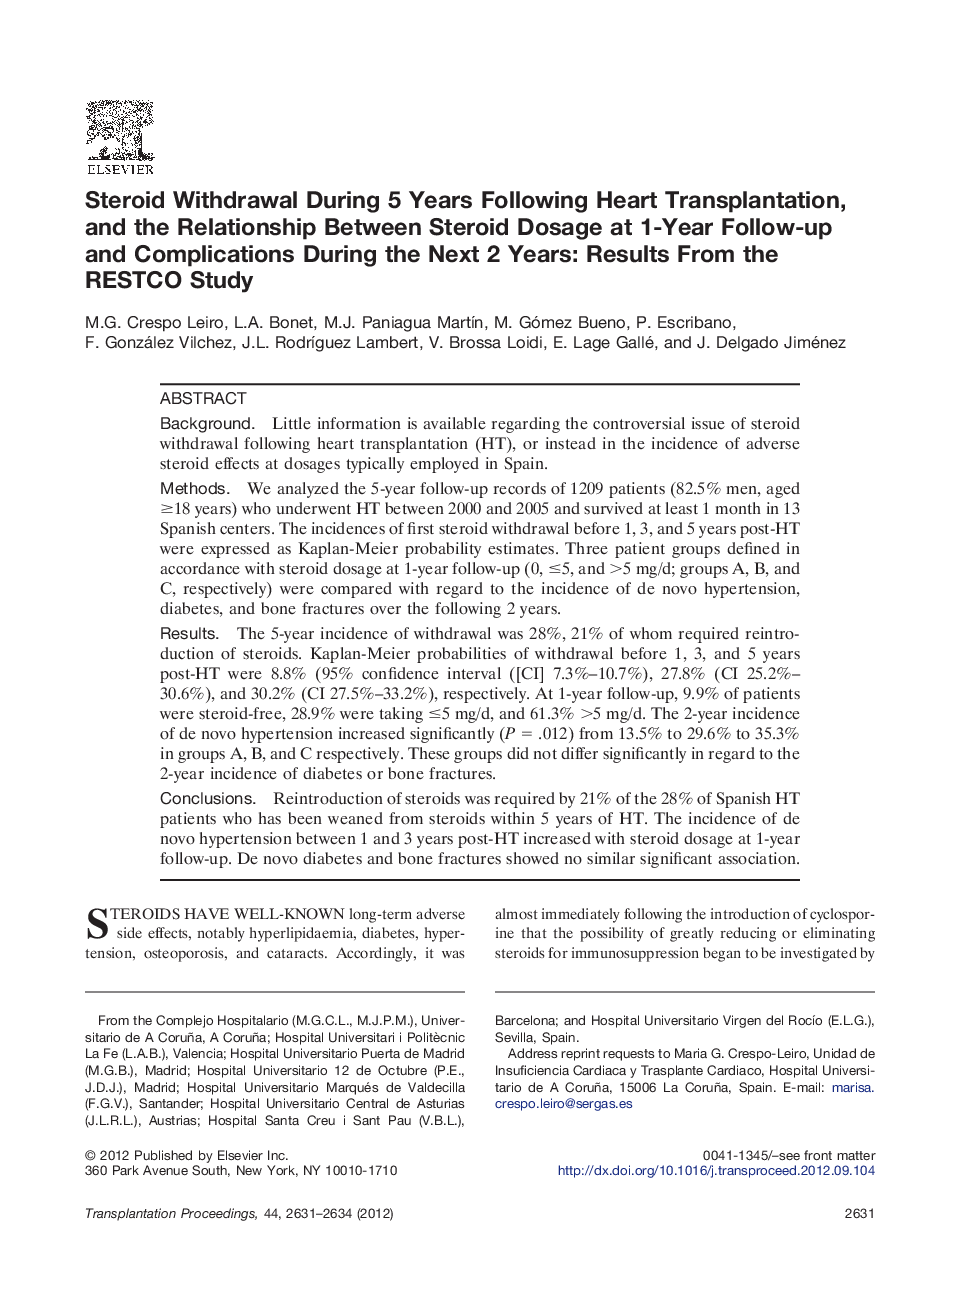 Steroid Withdrawal During 5 Years Following Heart Transplantation, and the Relationship Between Steroid Dosage at 1-Year Follow-up and Complications During the Next 2 Years: Results From the RESTCO Study